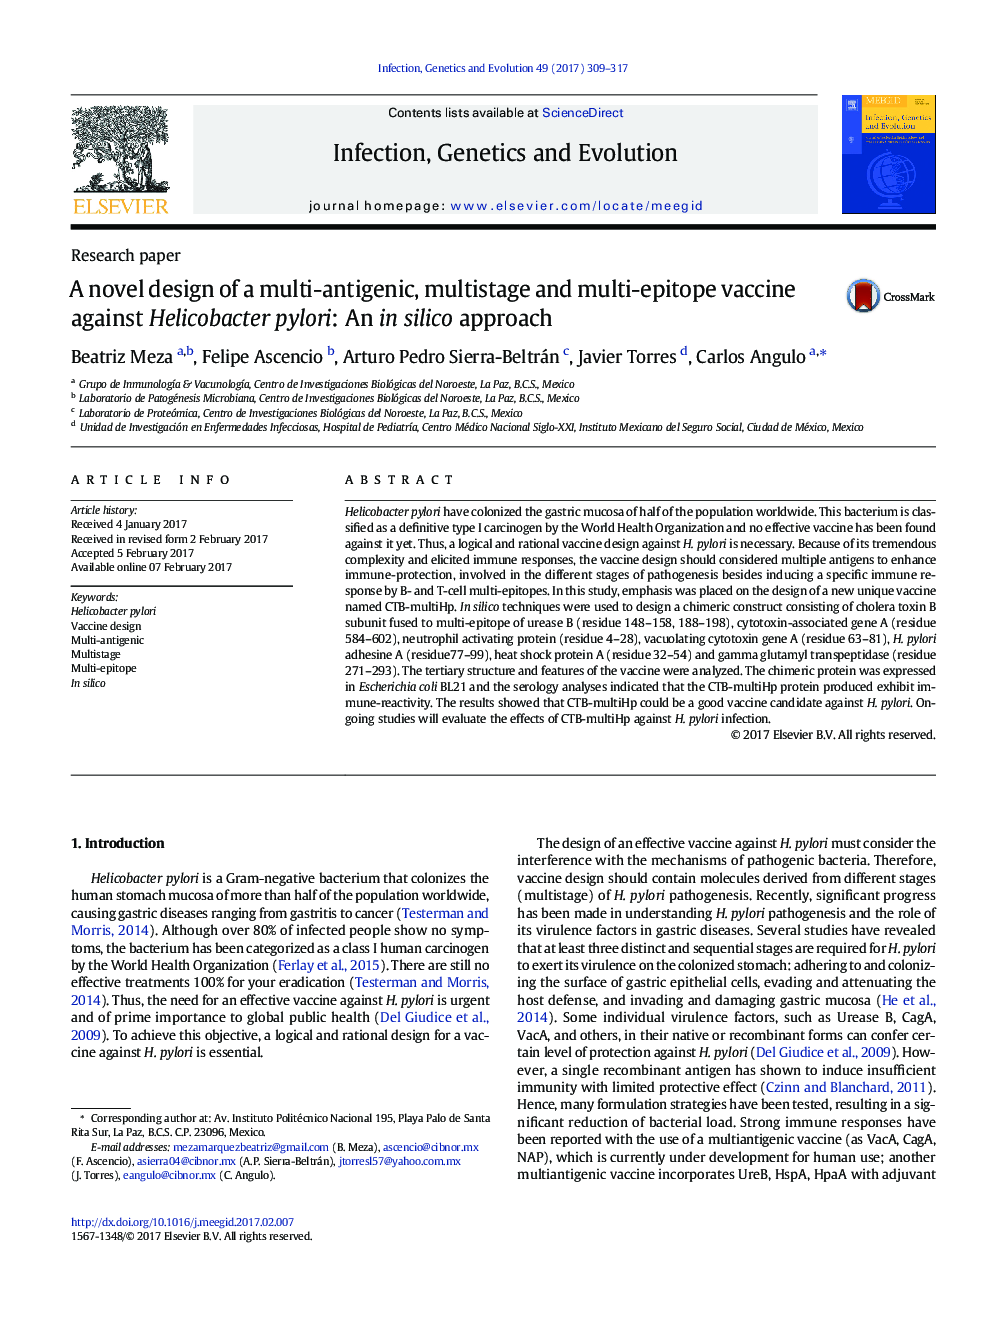 A novel design of a multi-antigenic, multistage and multi-epitope vaccine against Helicobacter pylori: An in silico approach